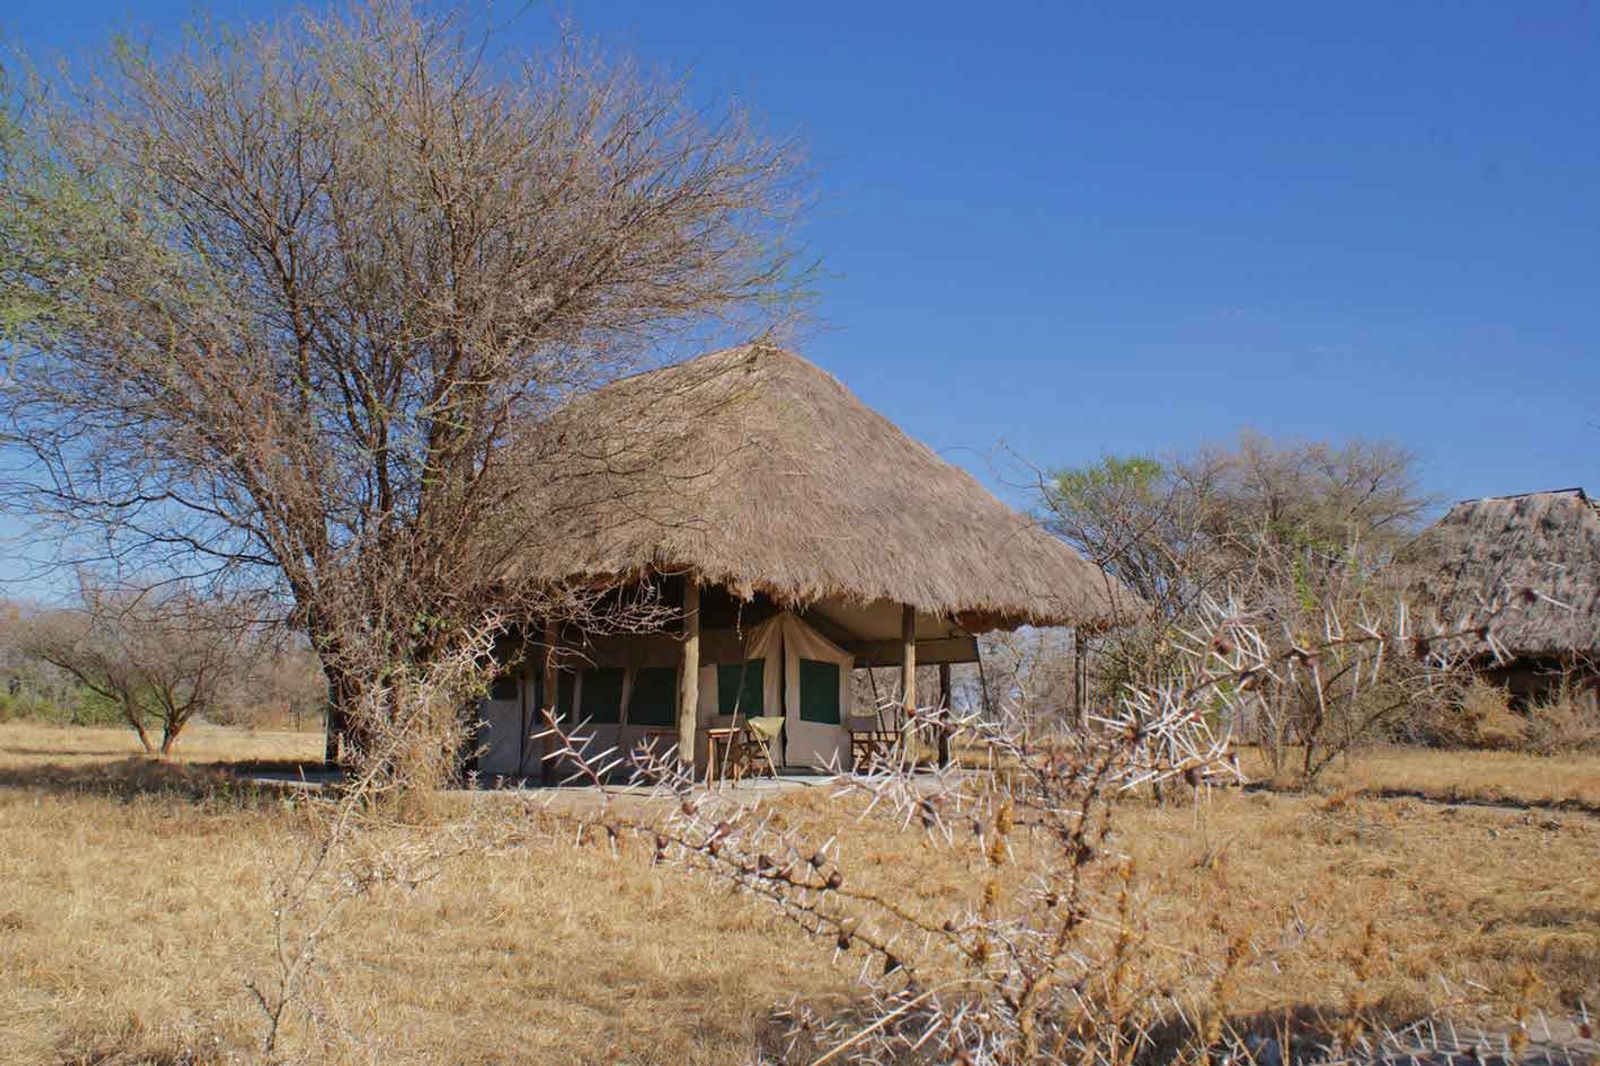 Whistling Thorn Tented Camp